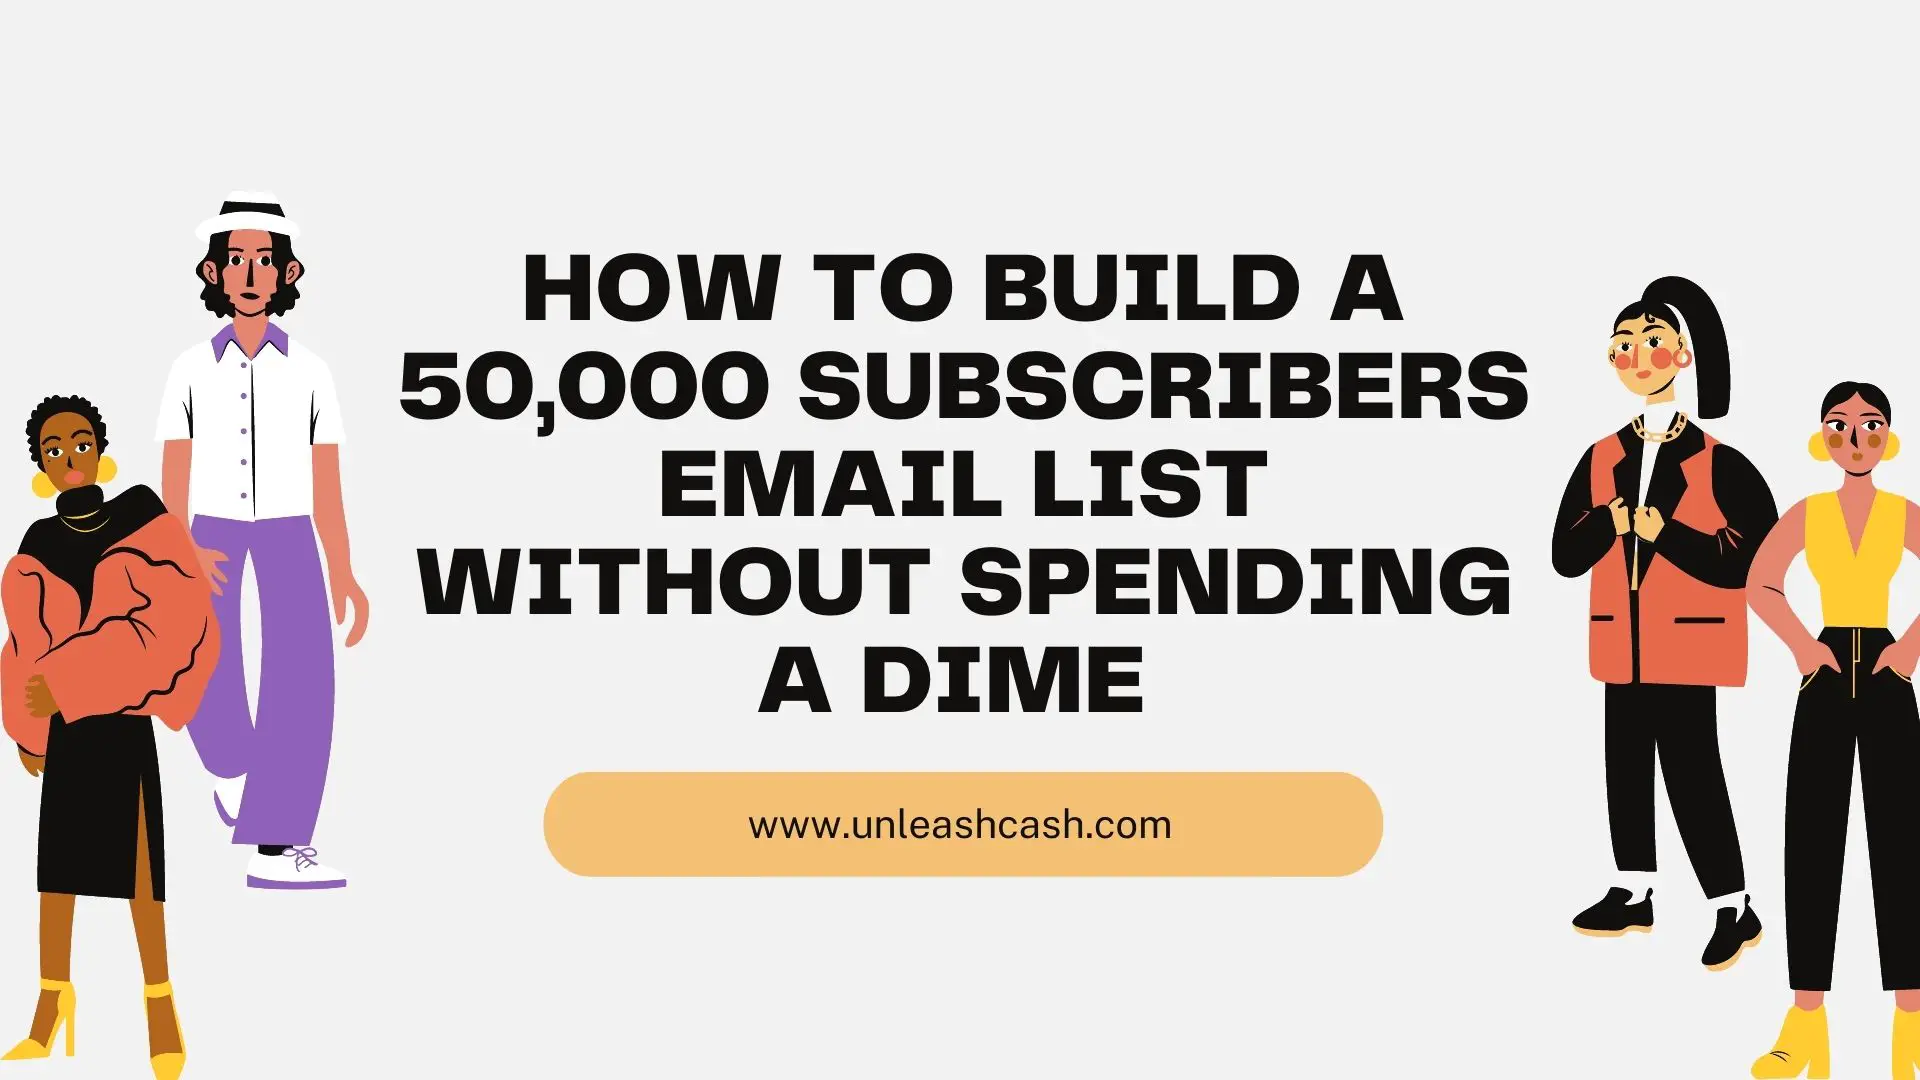 How To Build A 50,000 Subscribers Email List Without Spending A Dime